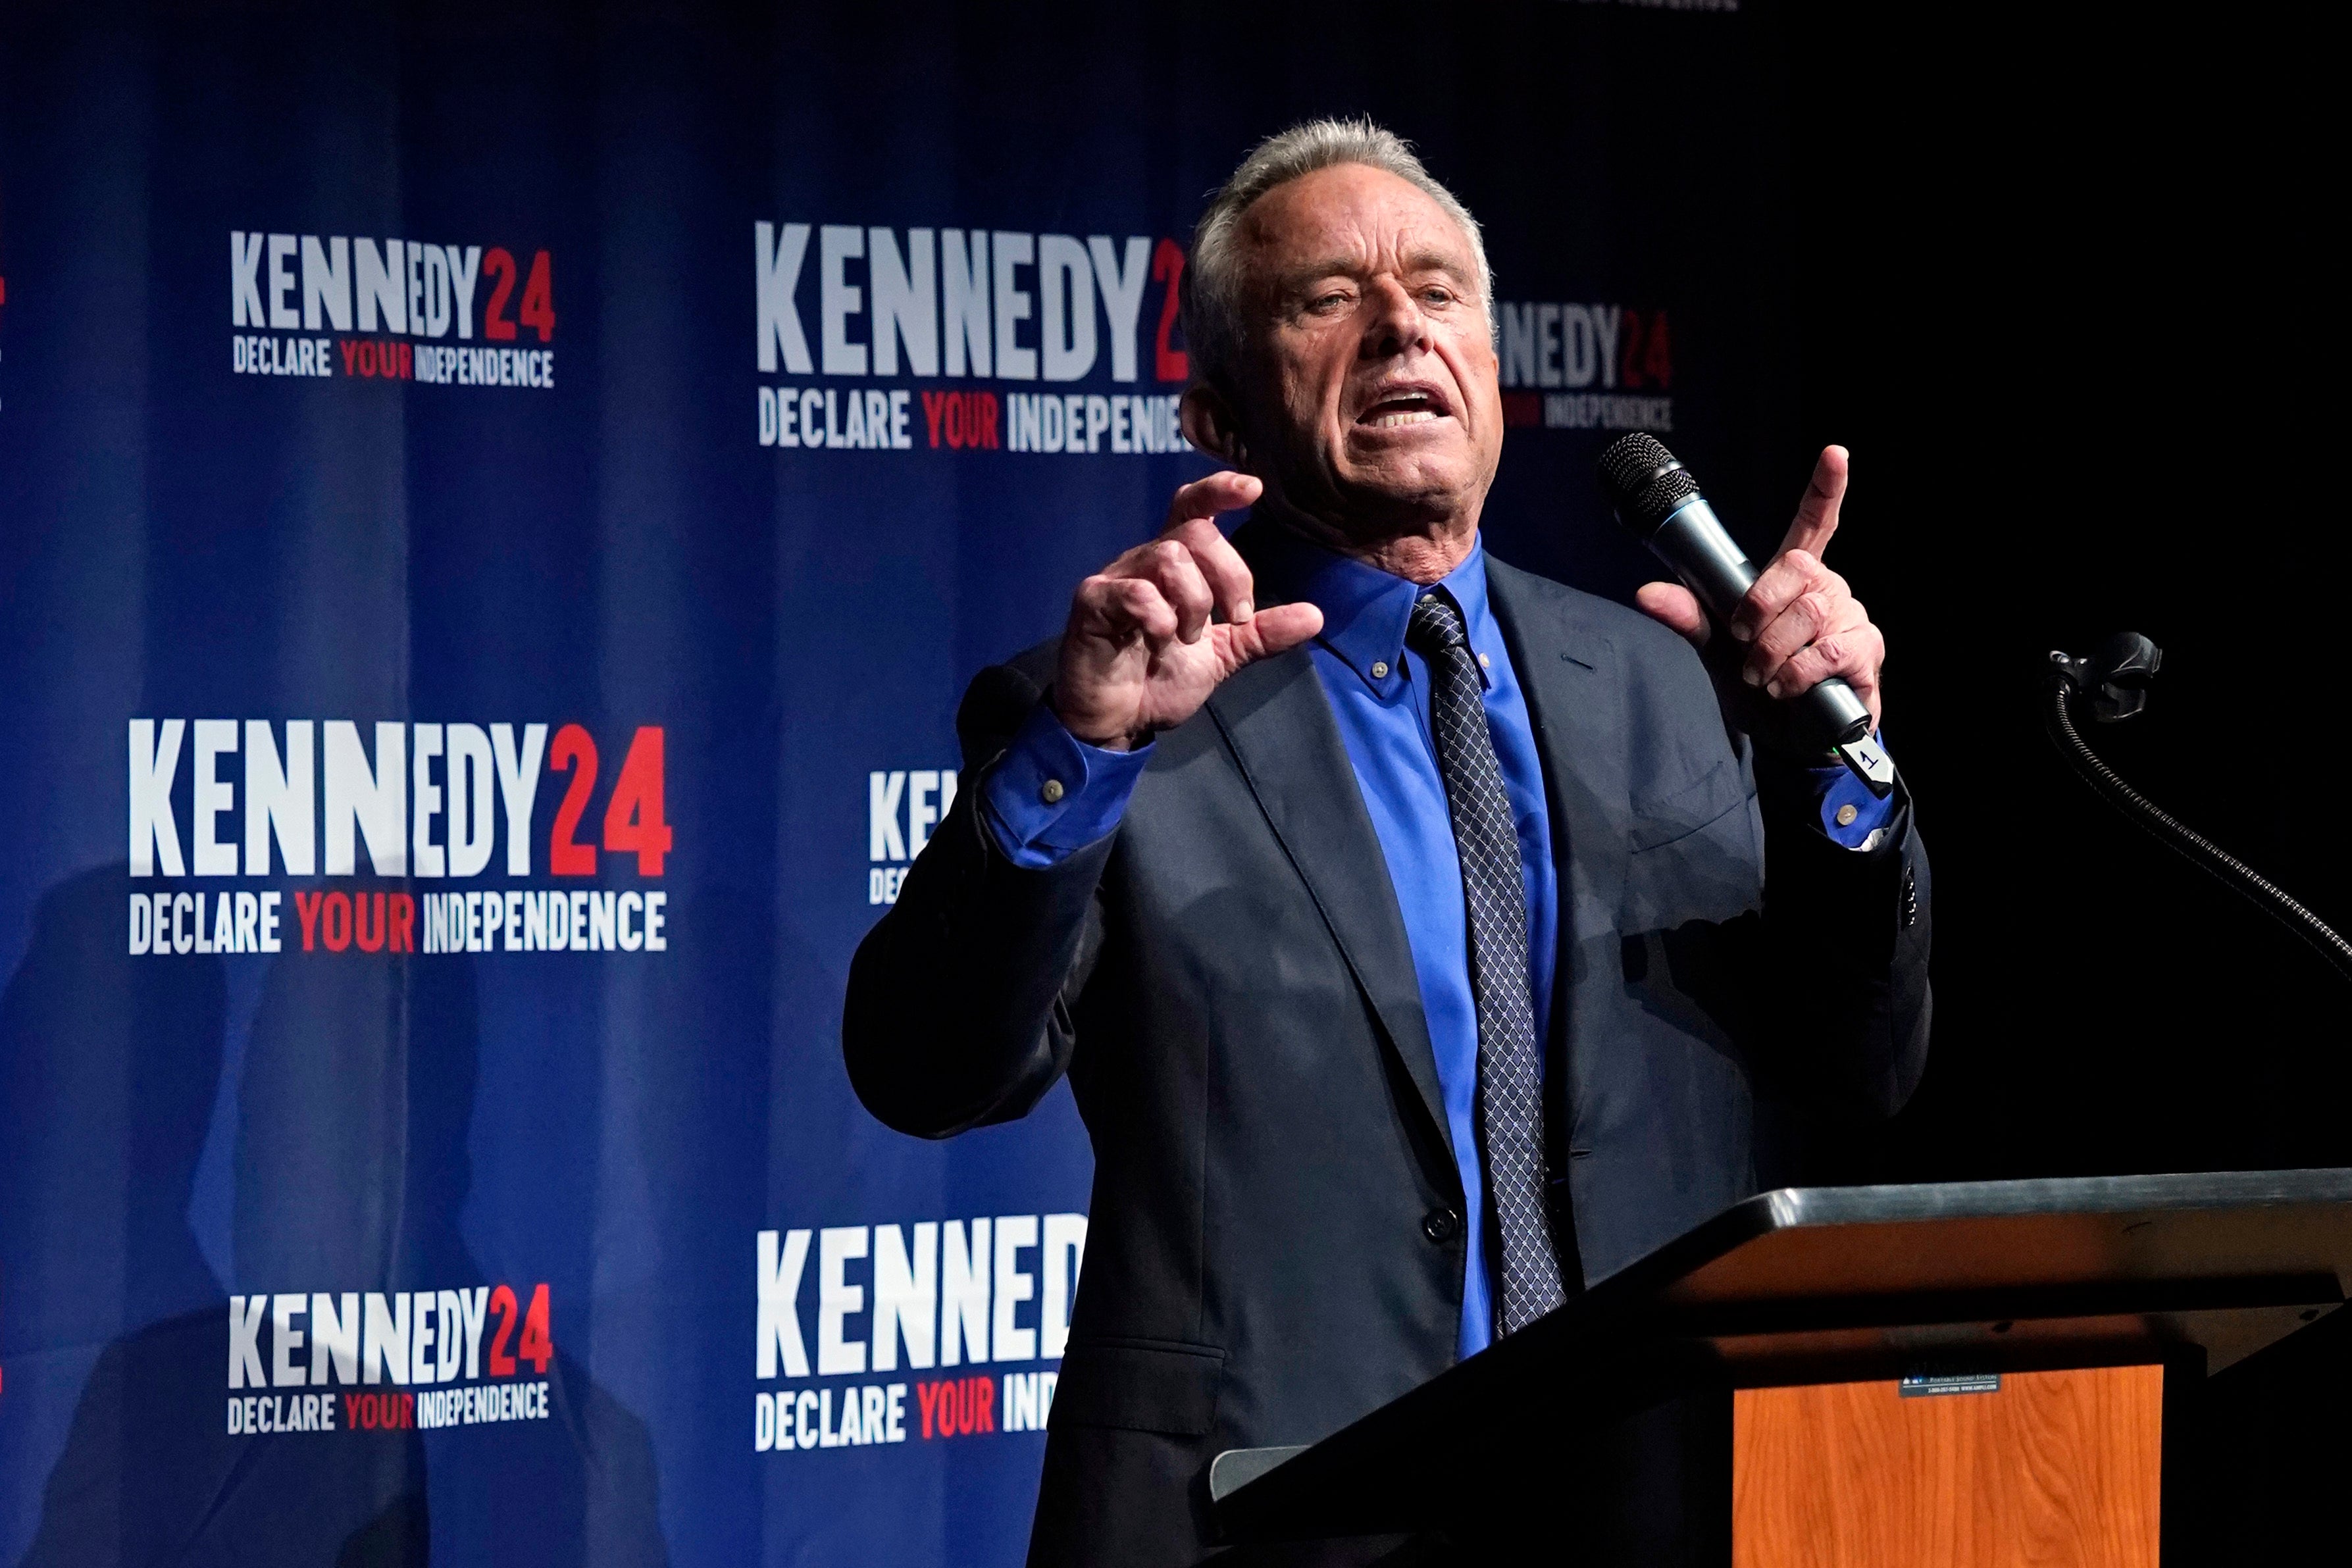 Robert F Kennedy Jr is running as an independent presidential candidate in 2024